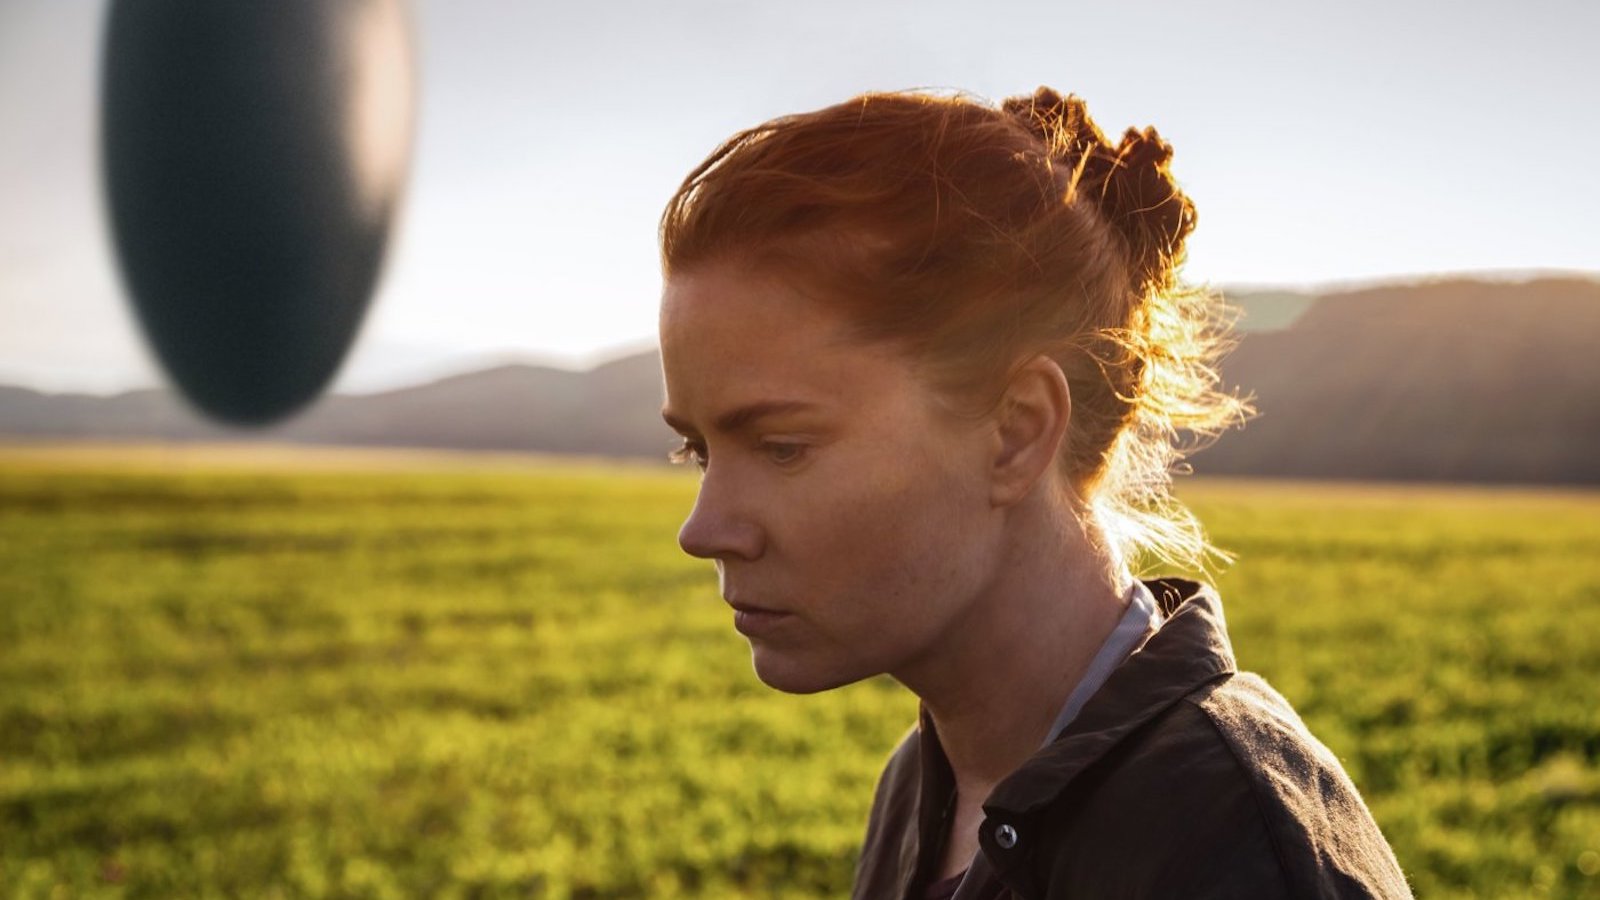 A woman stands in a field in profile with a hovering spacecraft behind her in the background